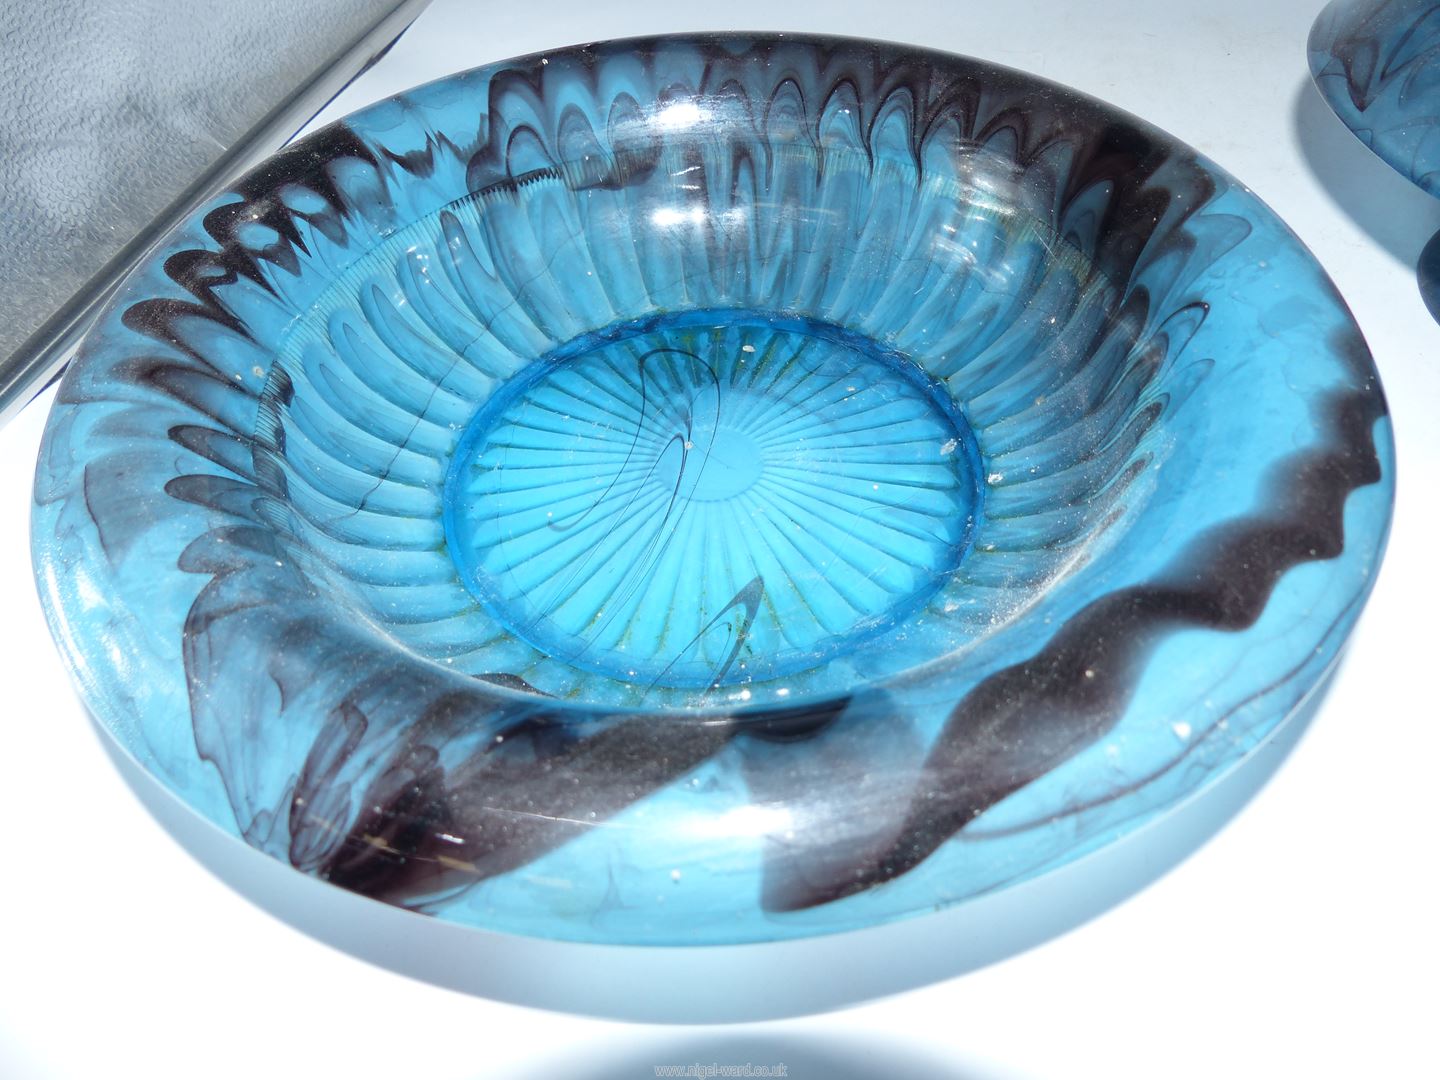 Three pieces of Art Deco 1930's/40's blue Cloud glass various sized bowls with rolled rims 7"-11" - Image 4 of 4